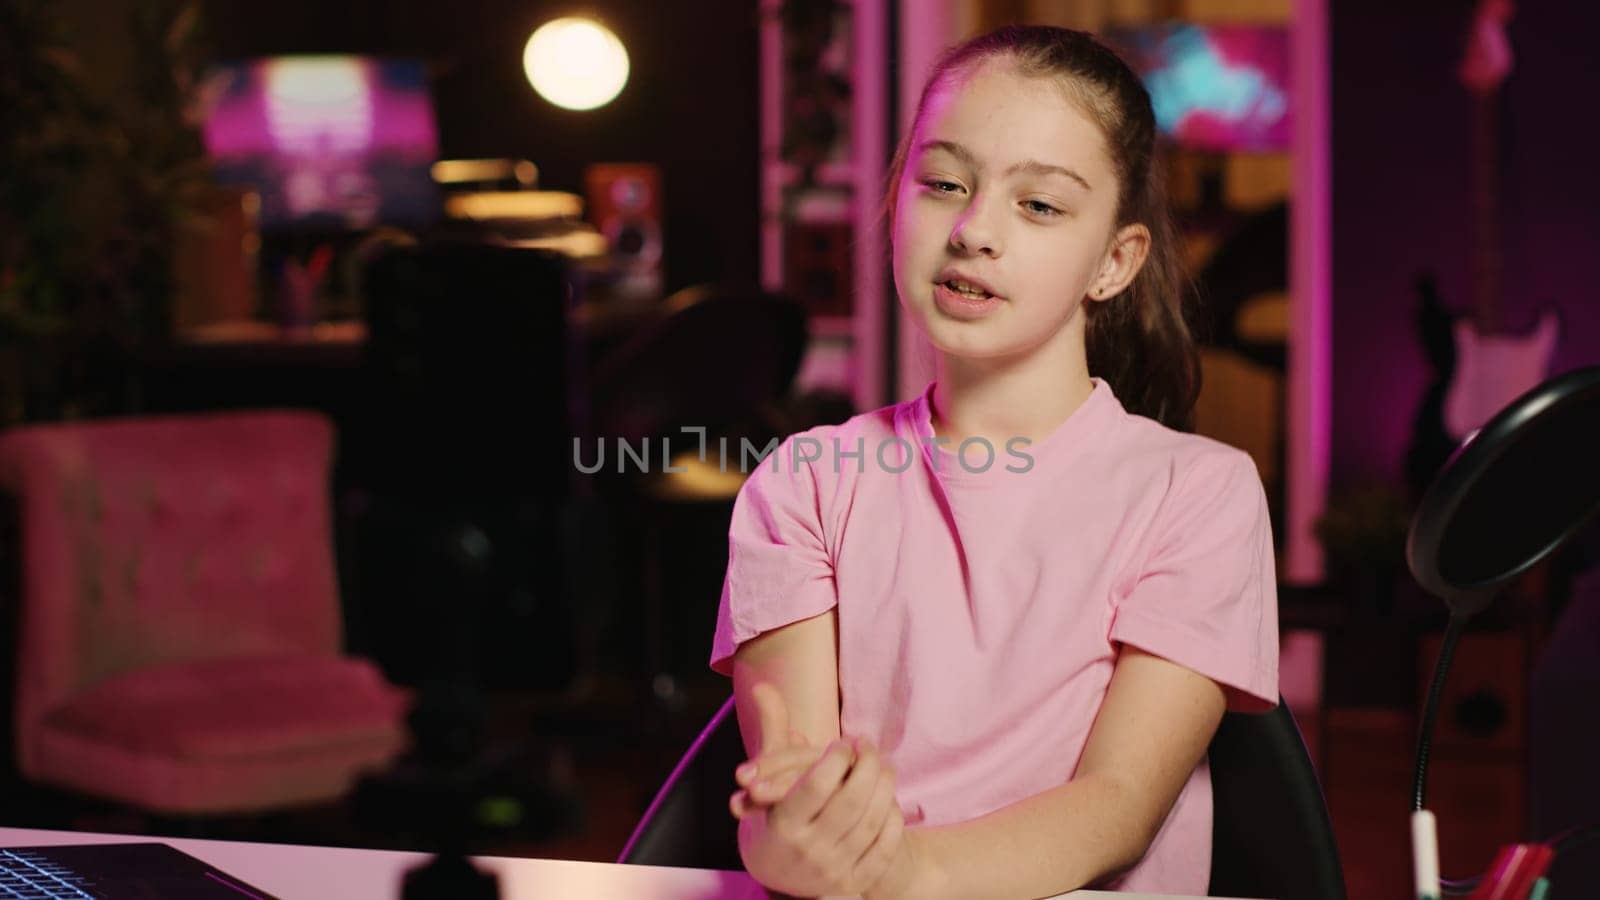 Charming young girl shooting video for social media platform in living room, talking about her day. Kid entertaining followers, doing content creation in neon lit apartment using smartphone on tripod